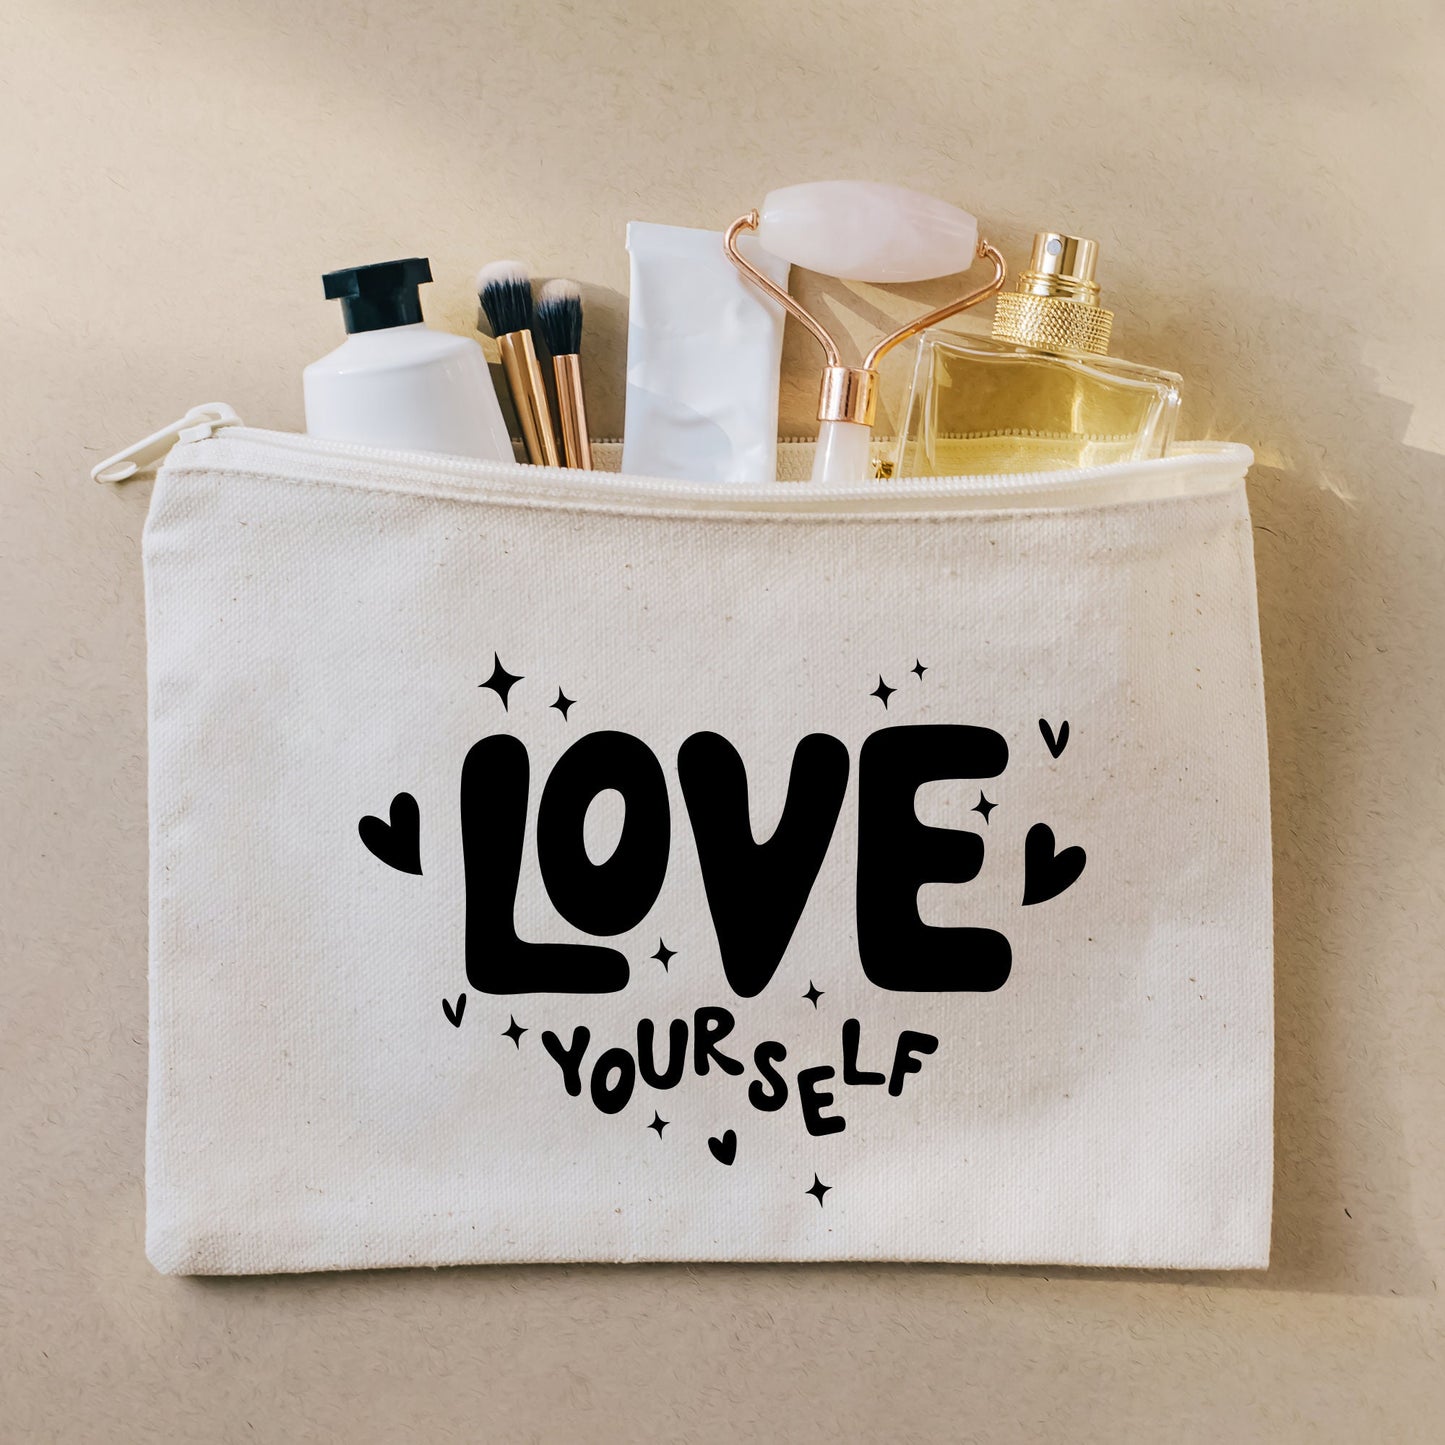 Make Up Bag, Love Yourself Pouch, Teen Daughter Birthday Gift, Make up Brush Bag, Friend Gifts, Travel Accessories